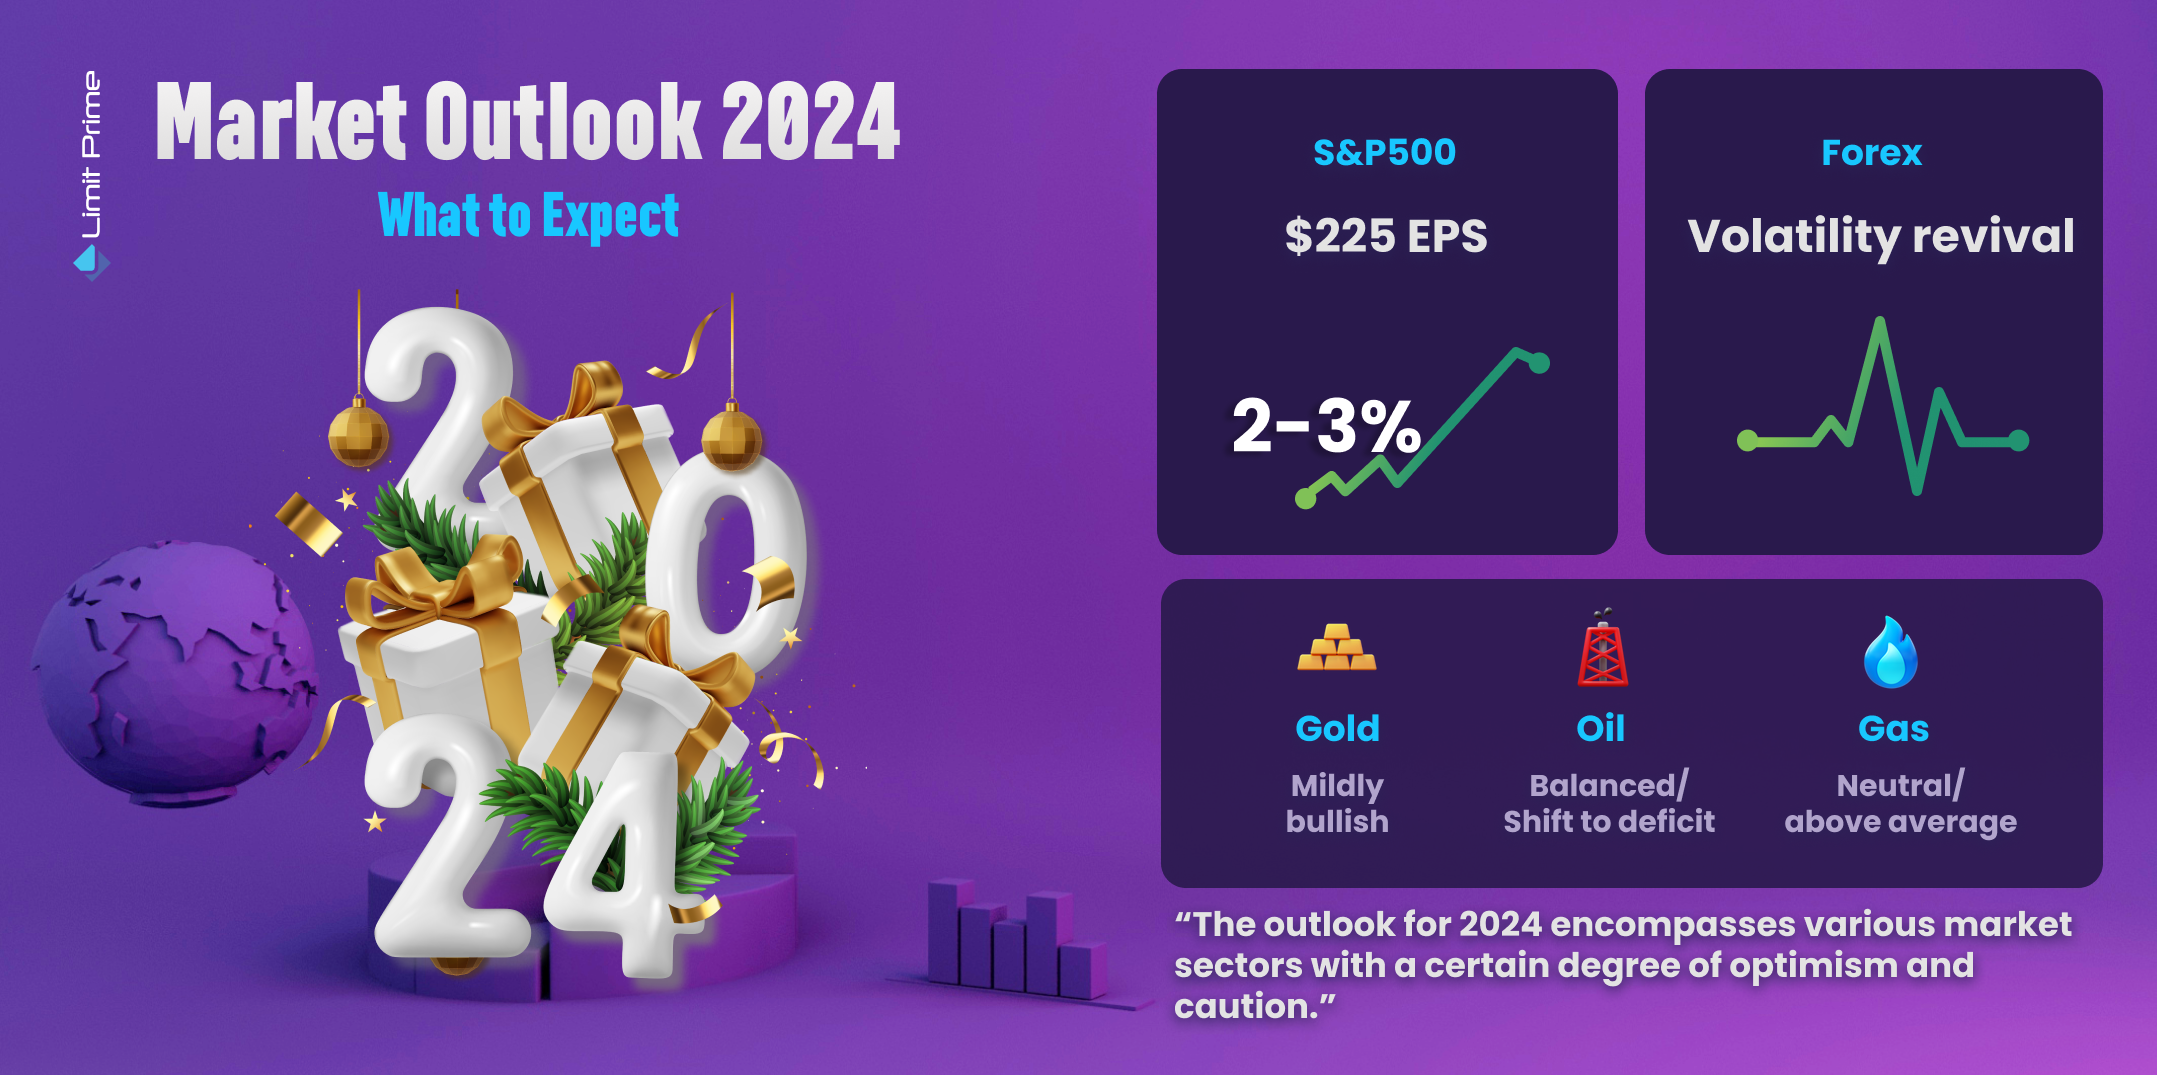 Market outlook for 2024 - What to expect?